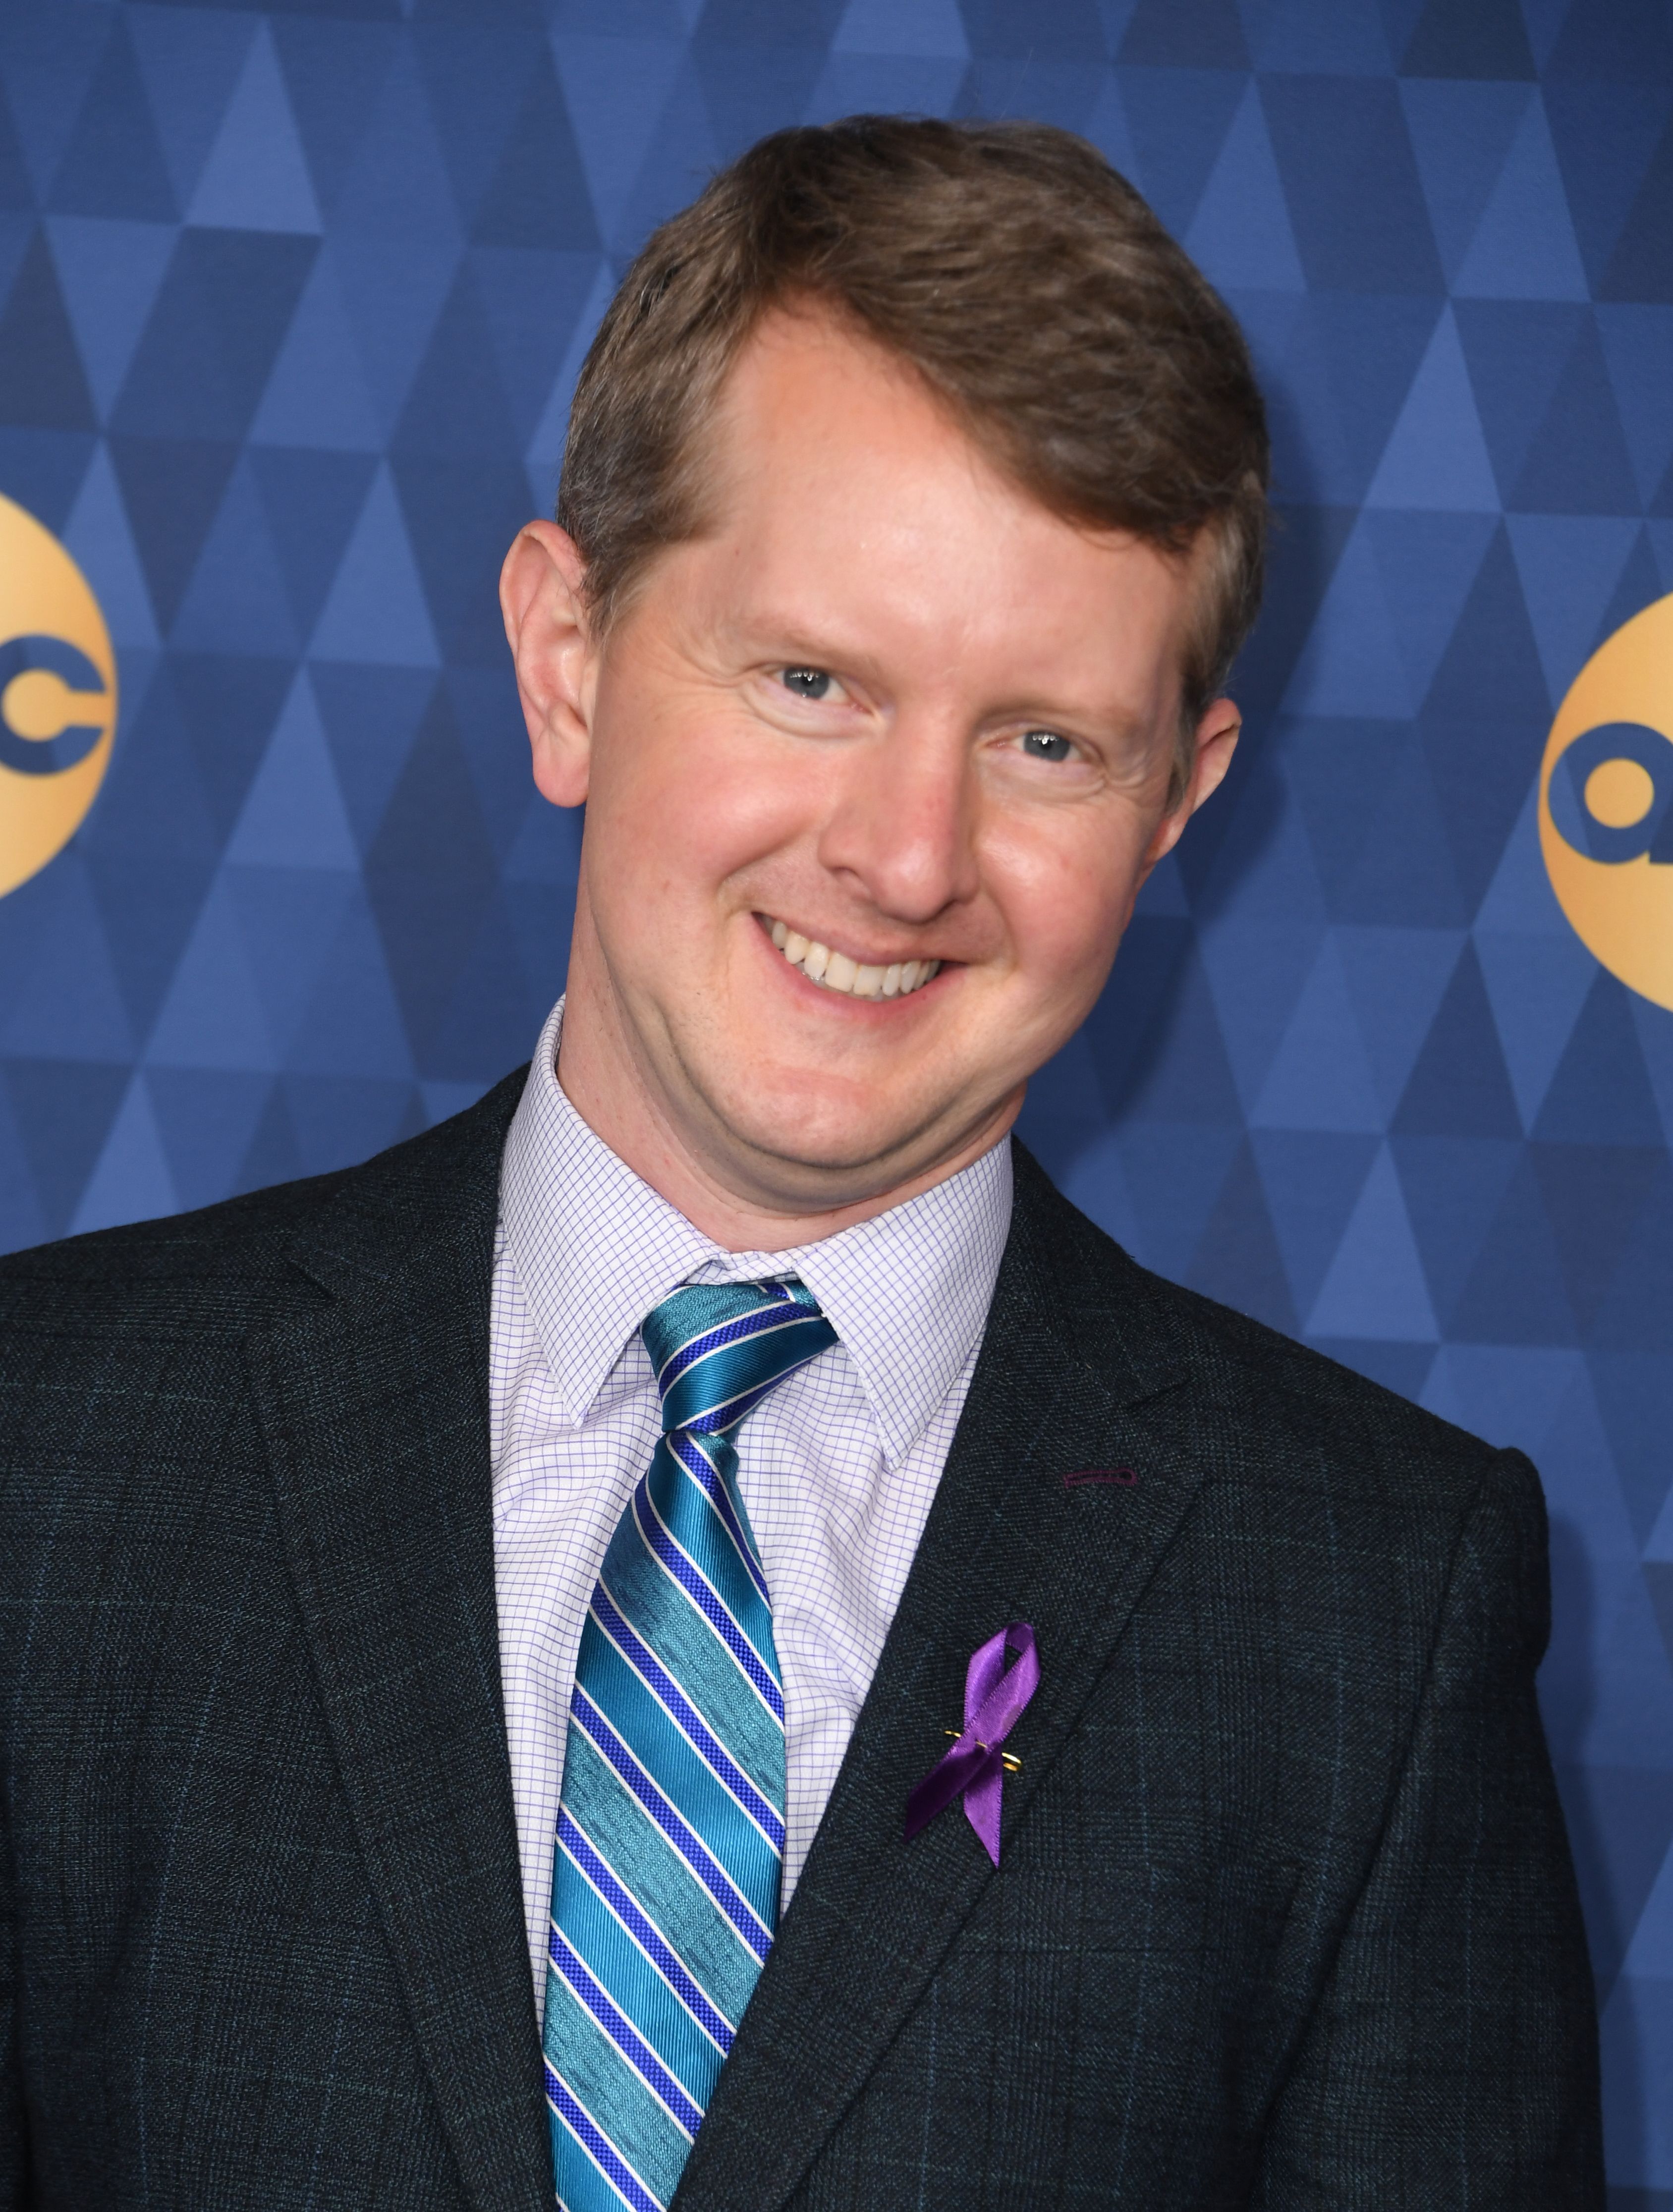  "Jeopardy!" champion Ken Jennings attends ABC's Winter TCA 2020 Press Tour in Pasadena, California, on January 8, 2020. | Source: Valeri Macon/Getty Images